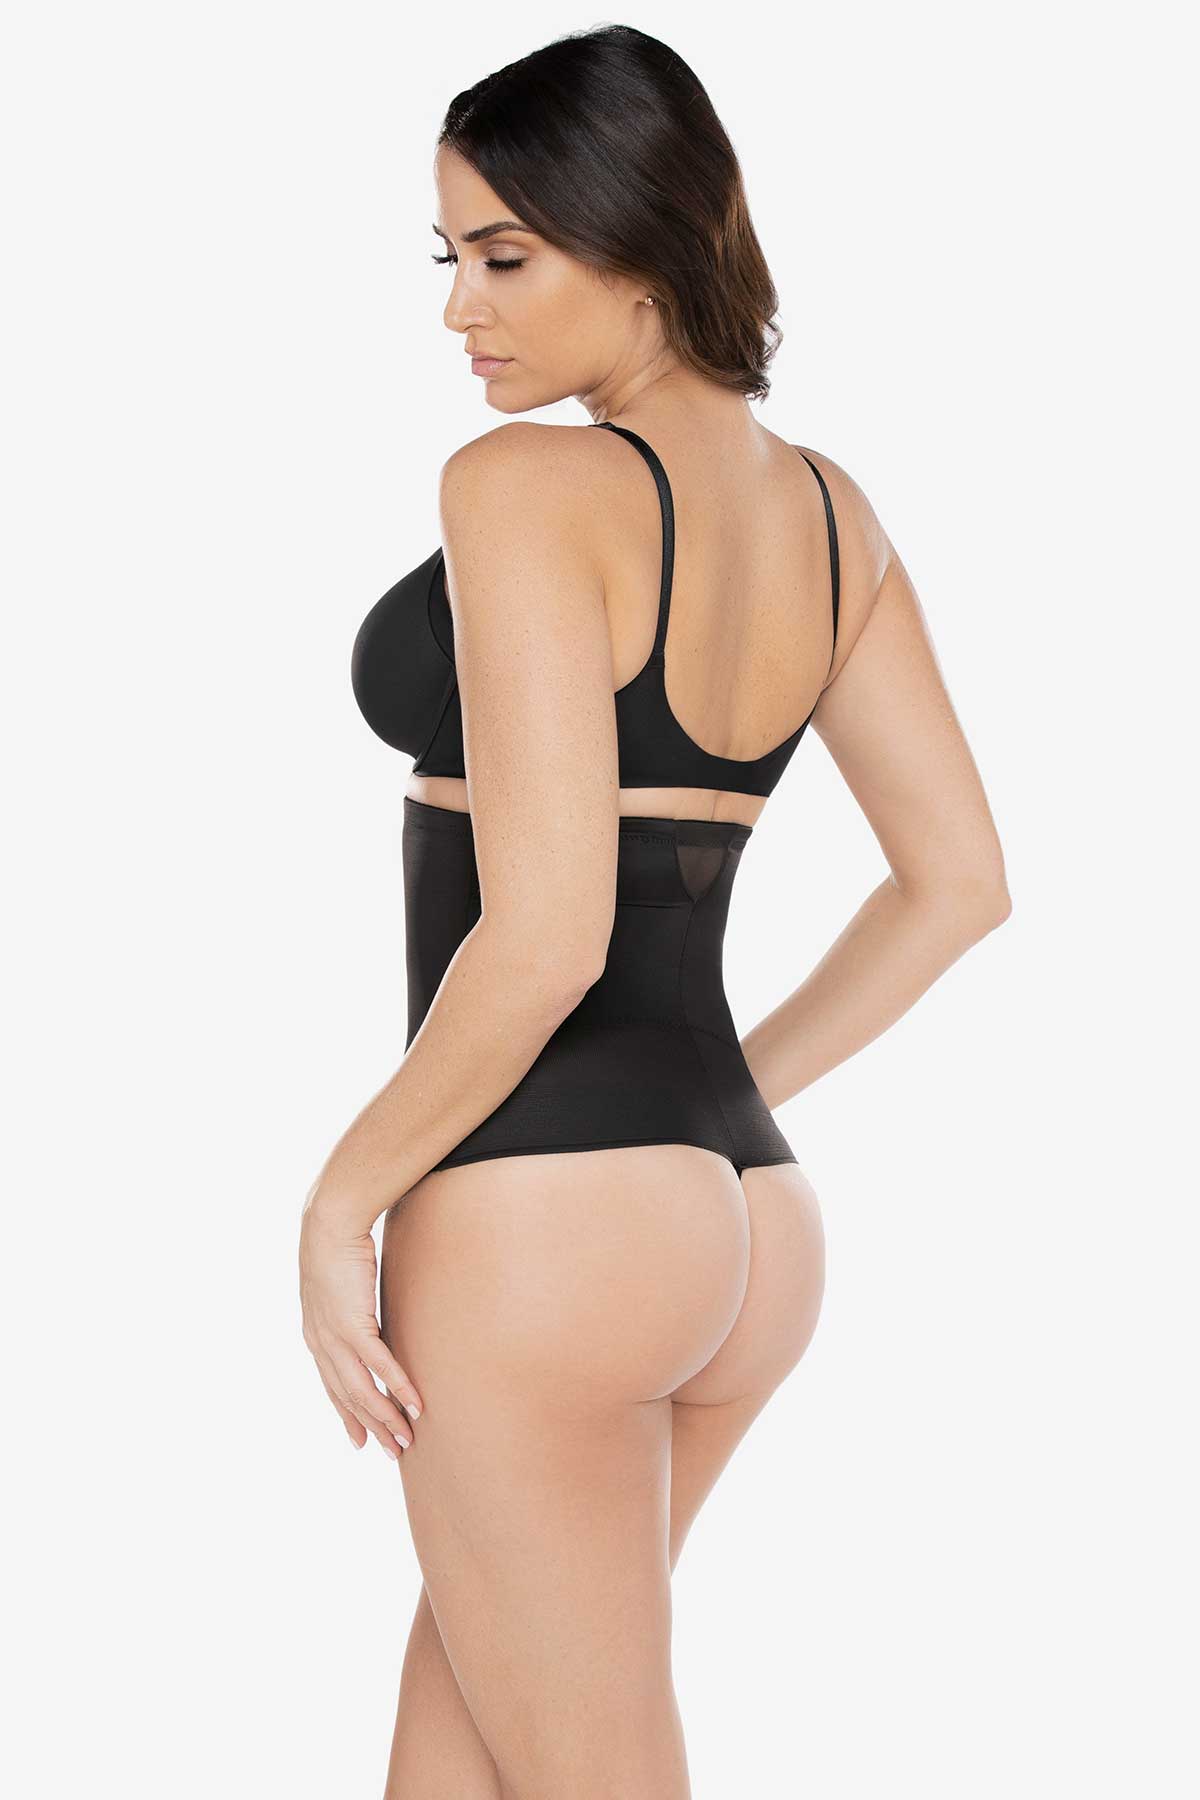 Miraclesuit Extra Firm Tummy-Control High-Waist Sheer Thong Black XL #2778